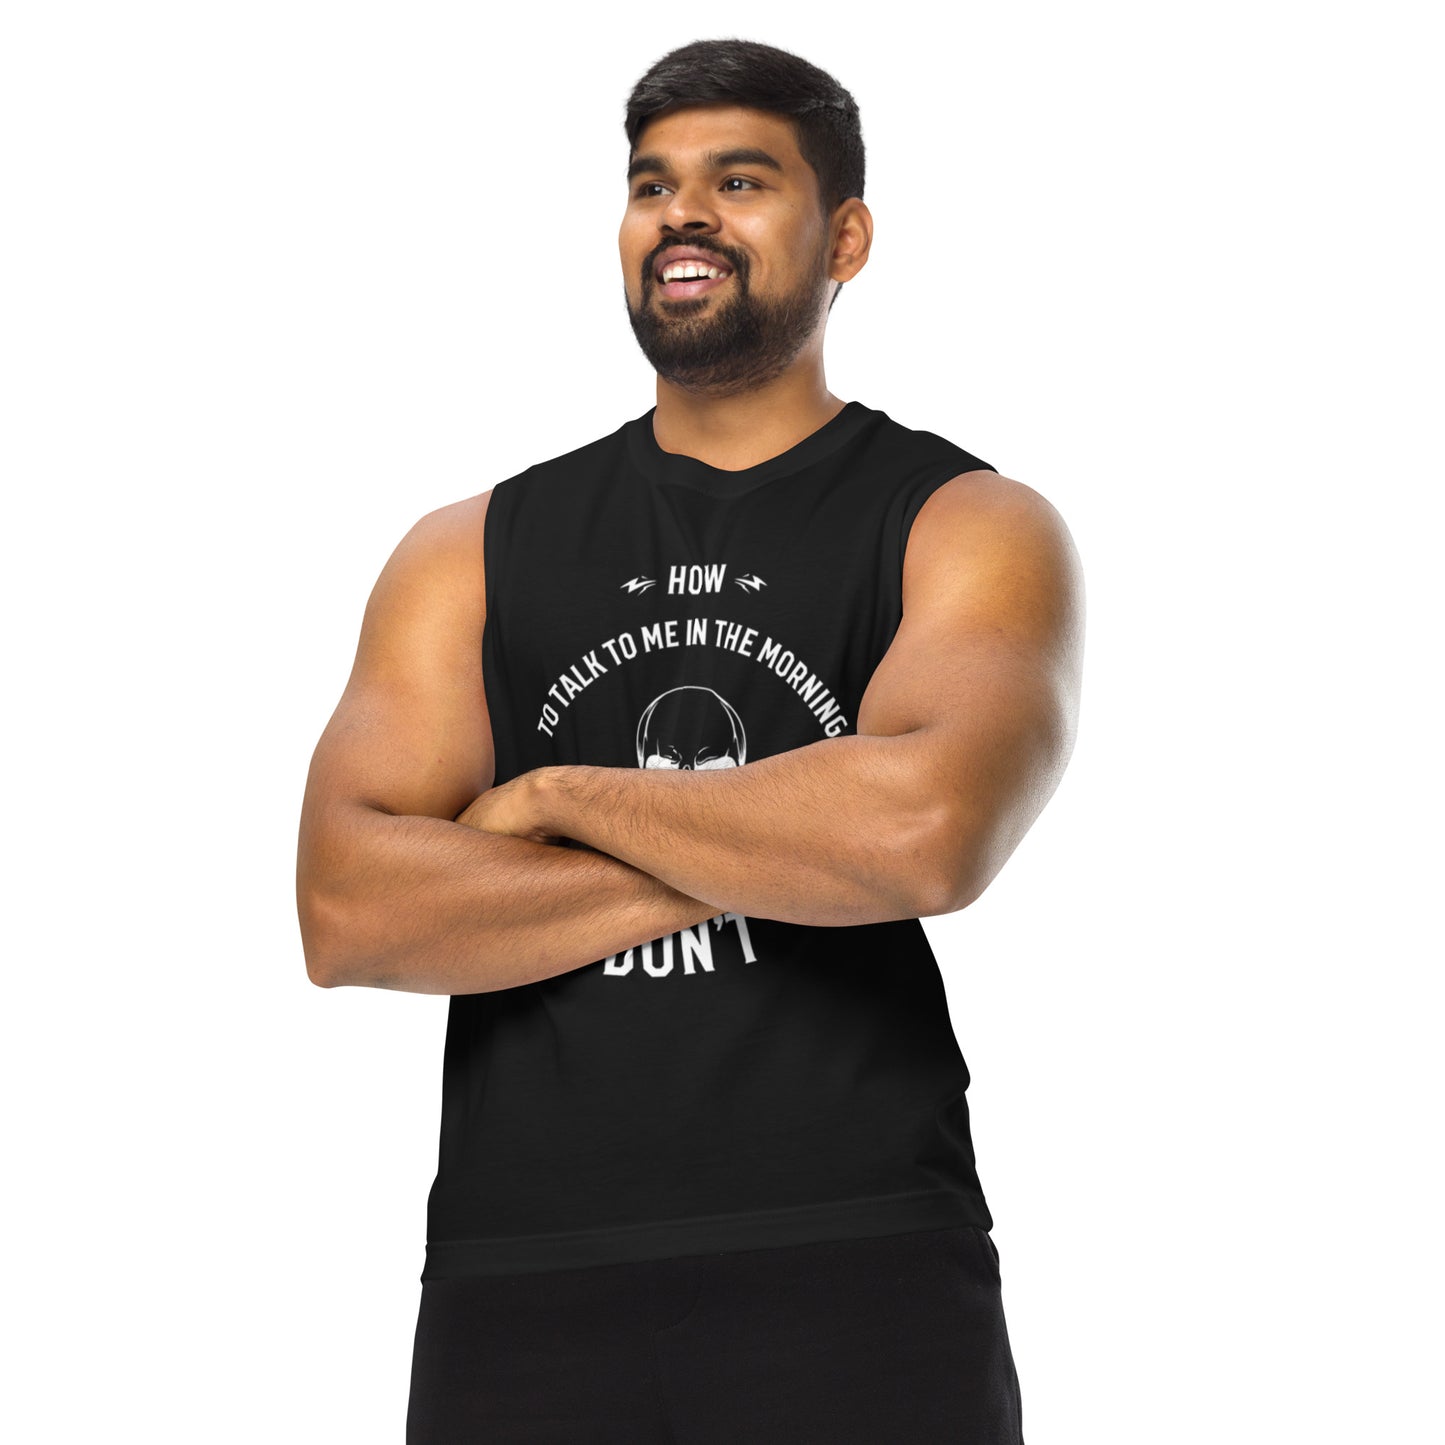 How to talk to me in the morning "Don't" Black Muscle Shirt